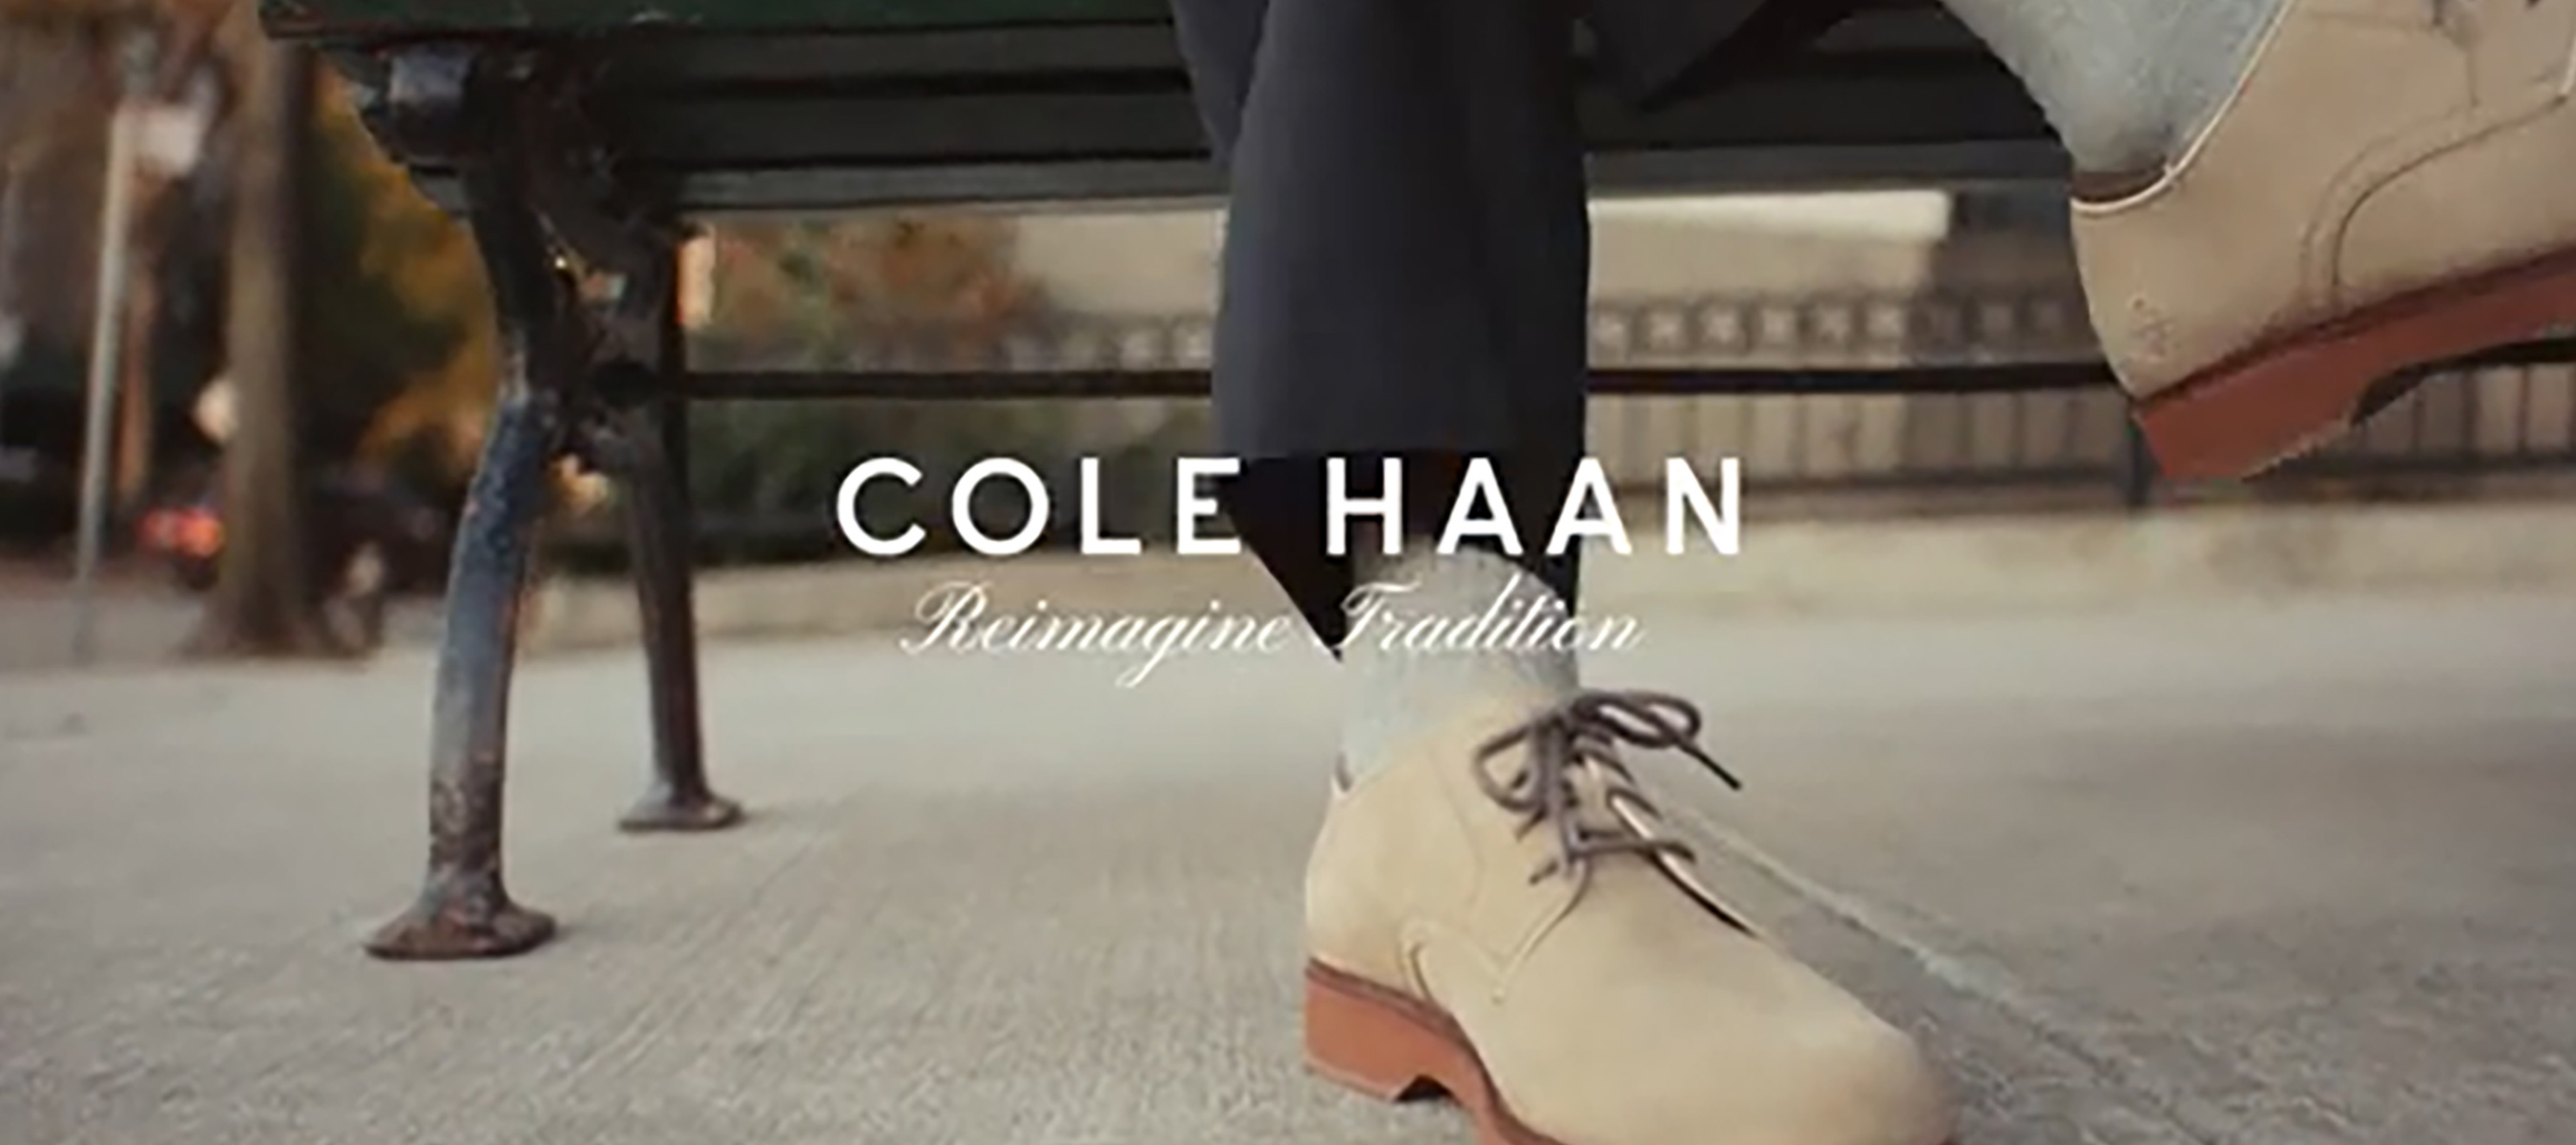 COLE HAAN REIMAGINES TRADITION WITH ITS NEW SPRING CAMPAIGN